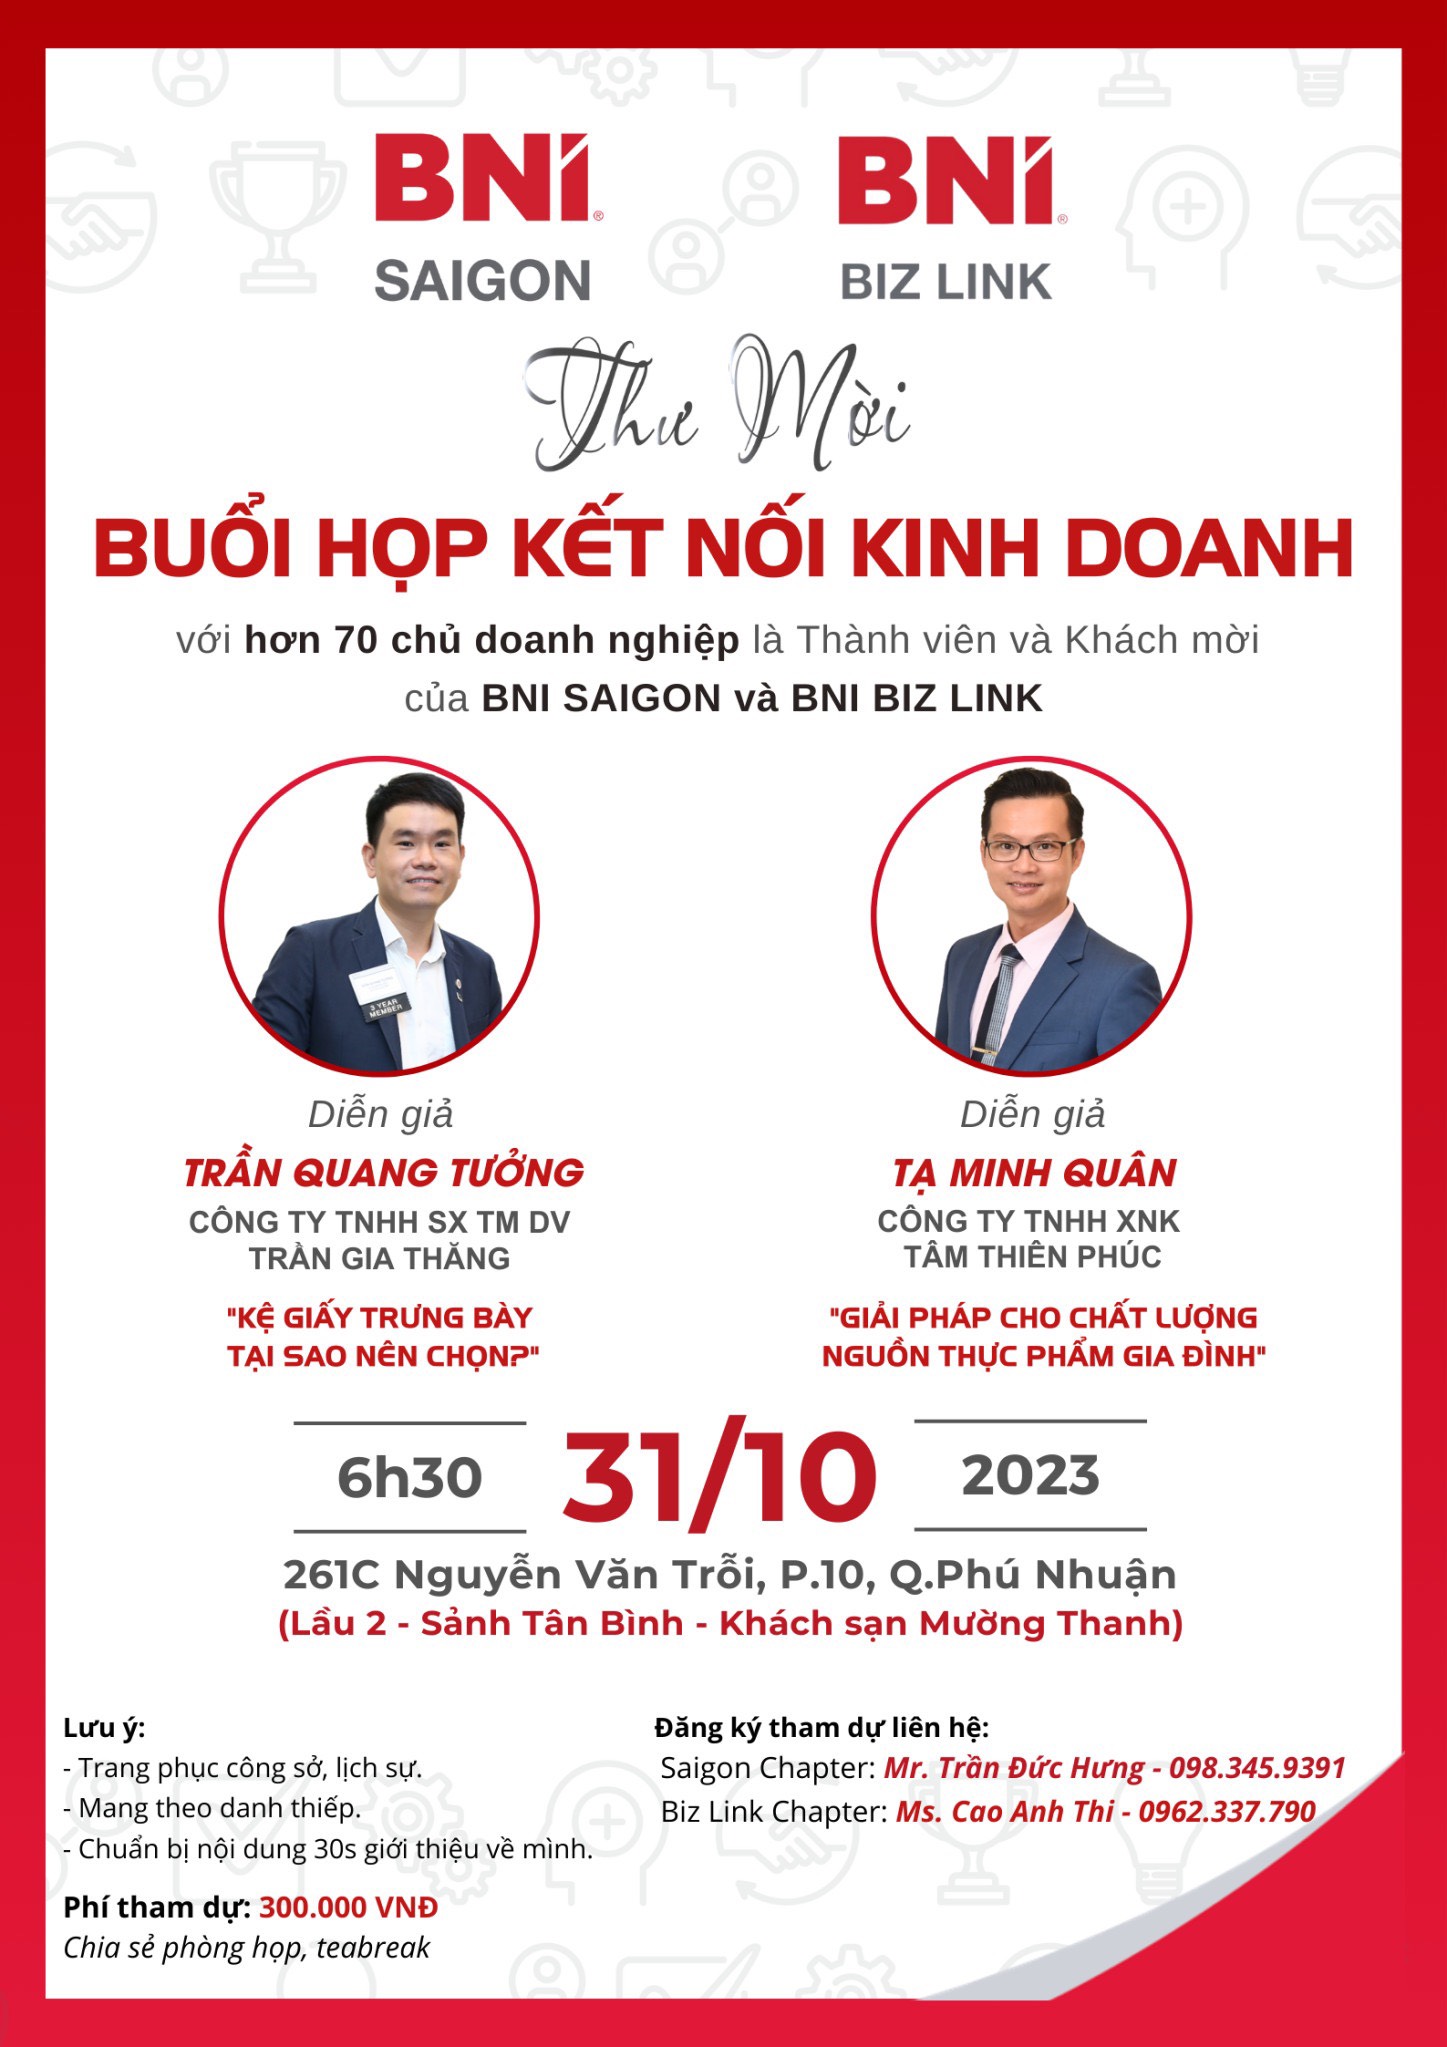 Buổi họp chapter 31/10